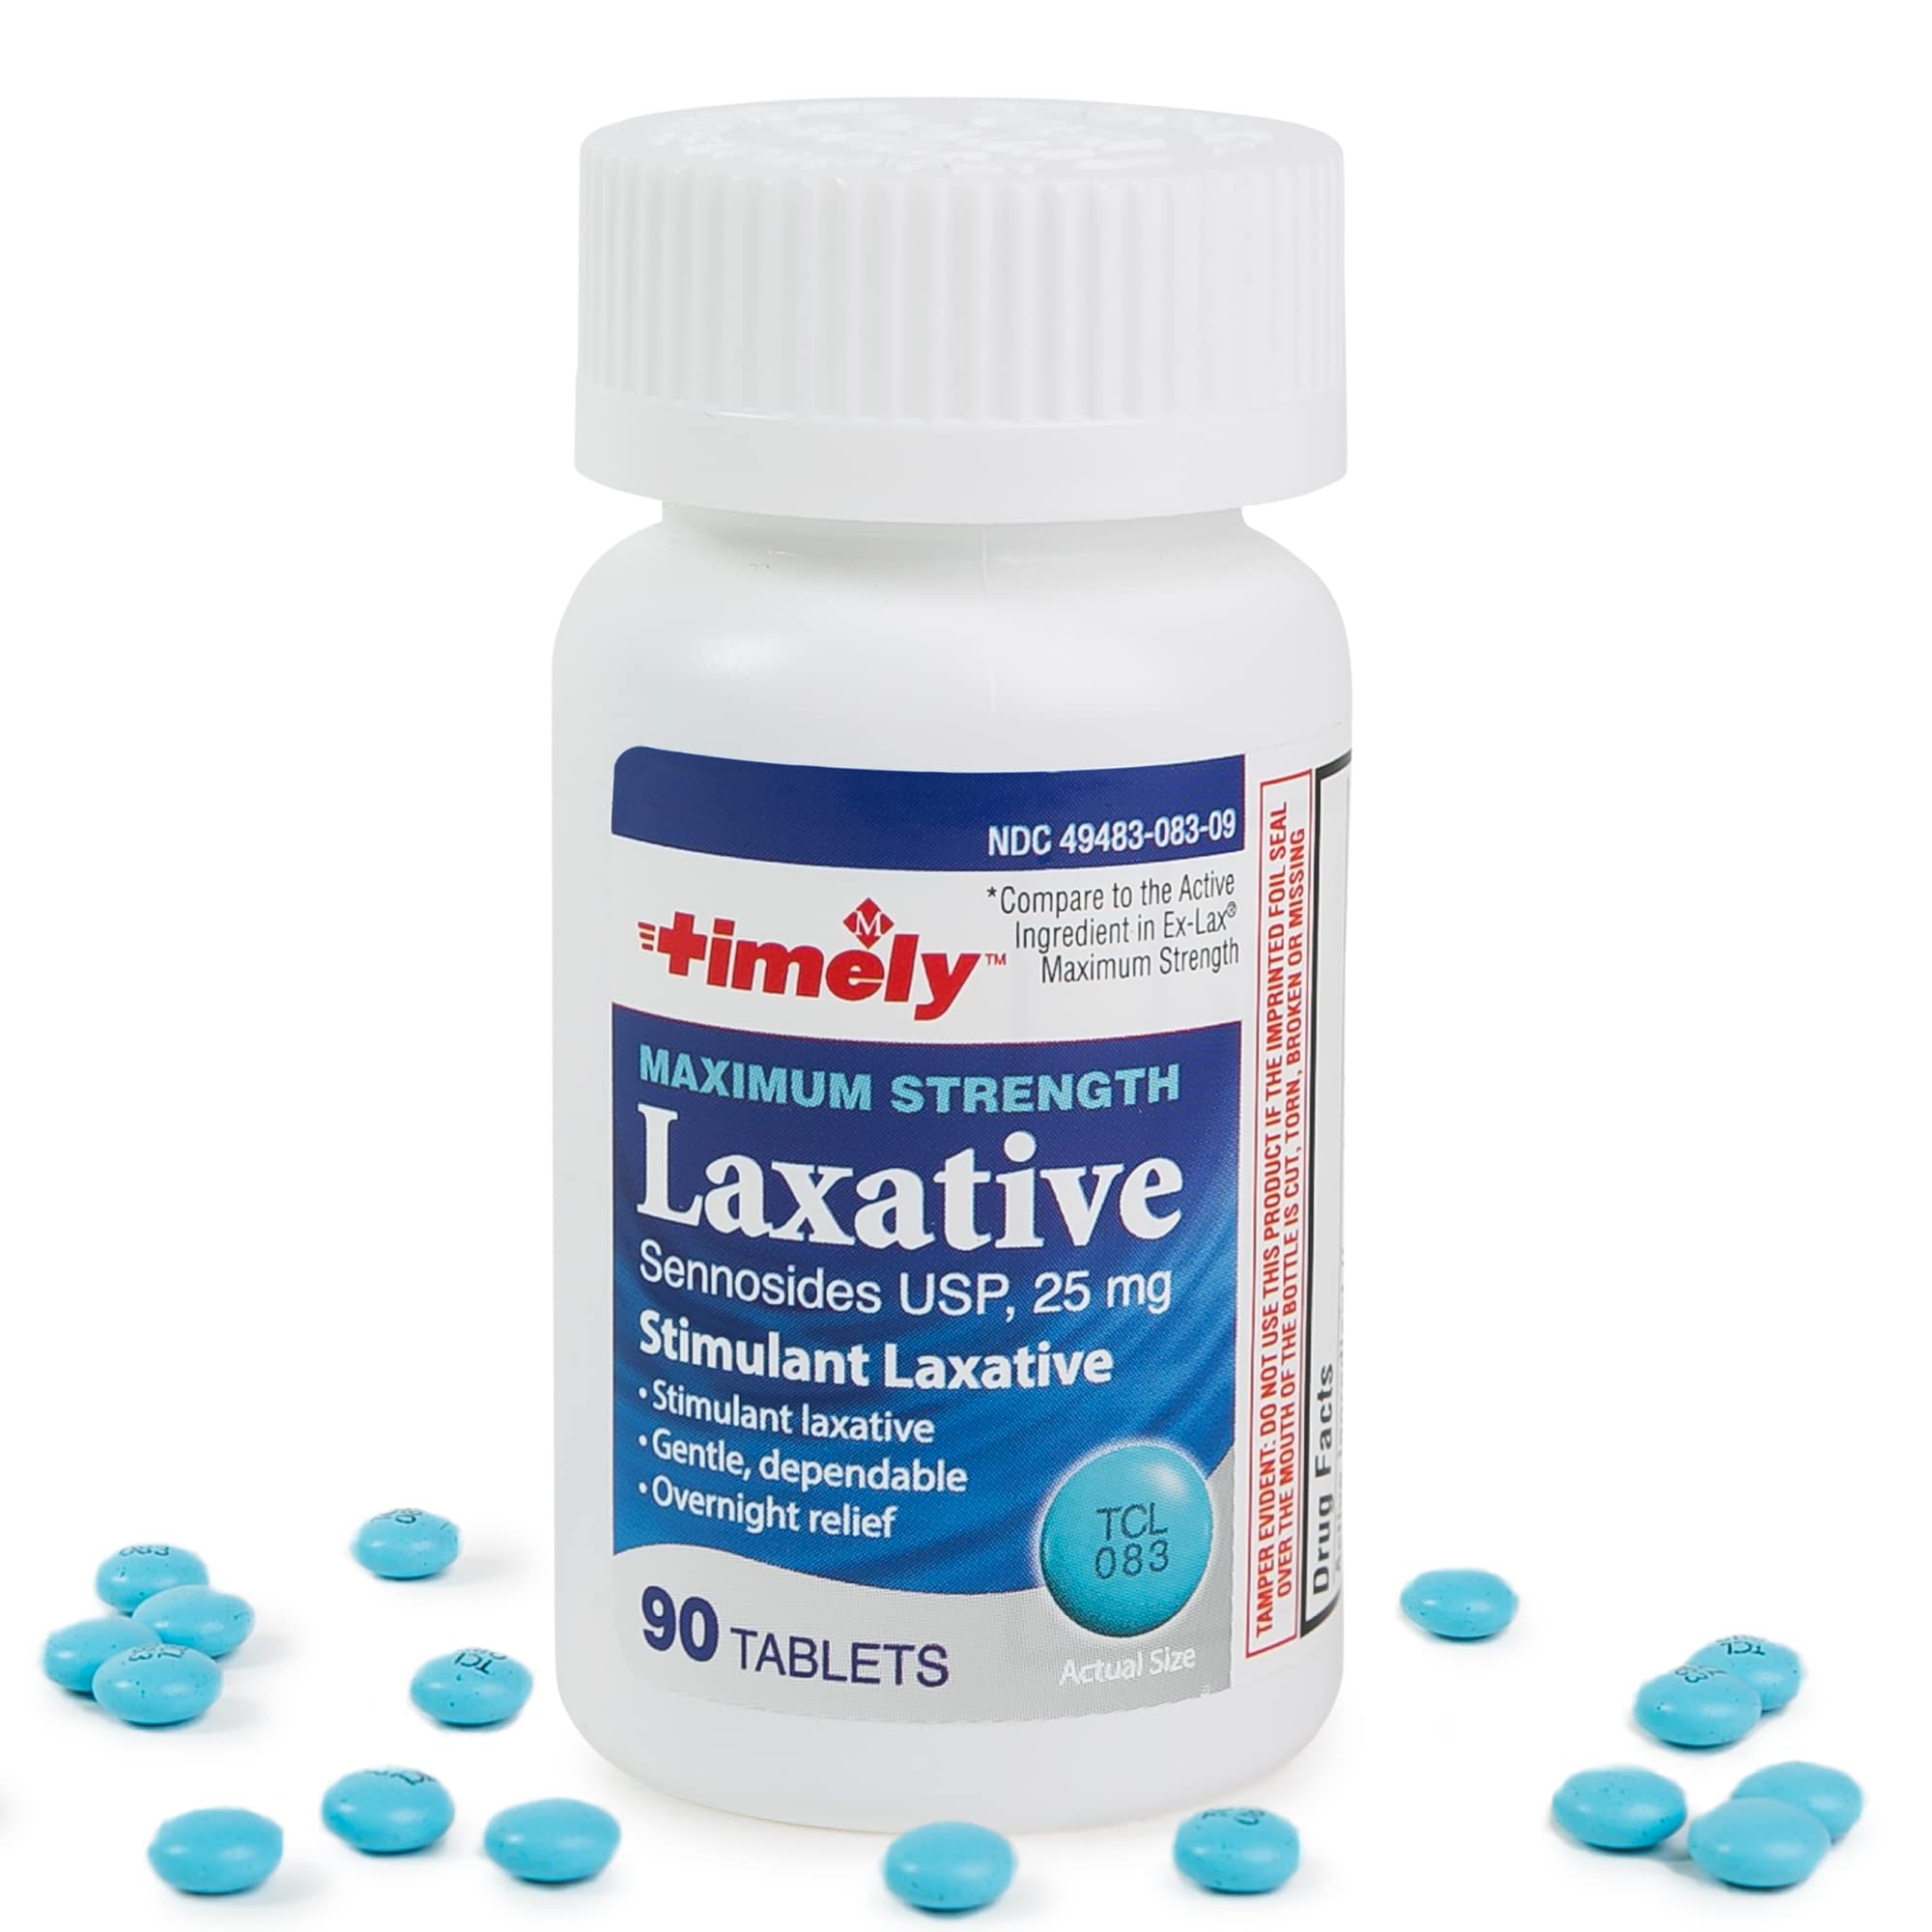 Max Lax Laxatives For Constipation Relief 90 Maximum Strength Tablets 25mg Sennosides